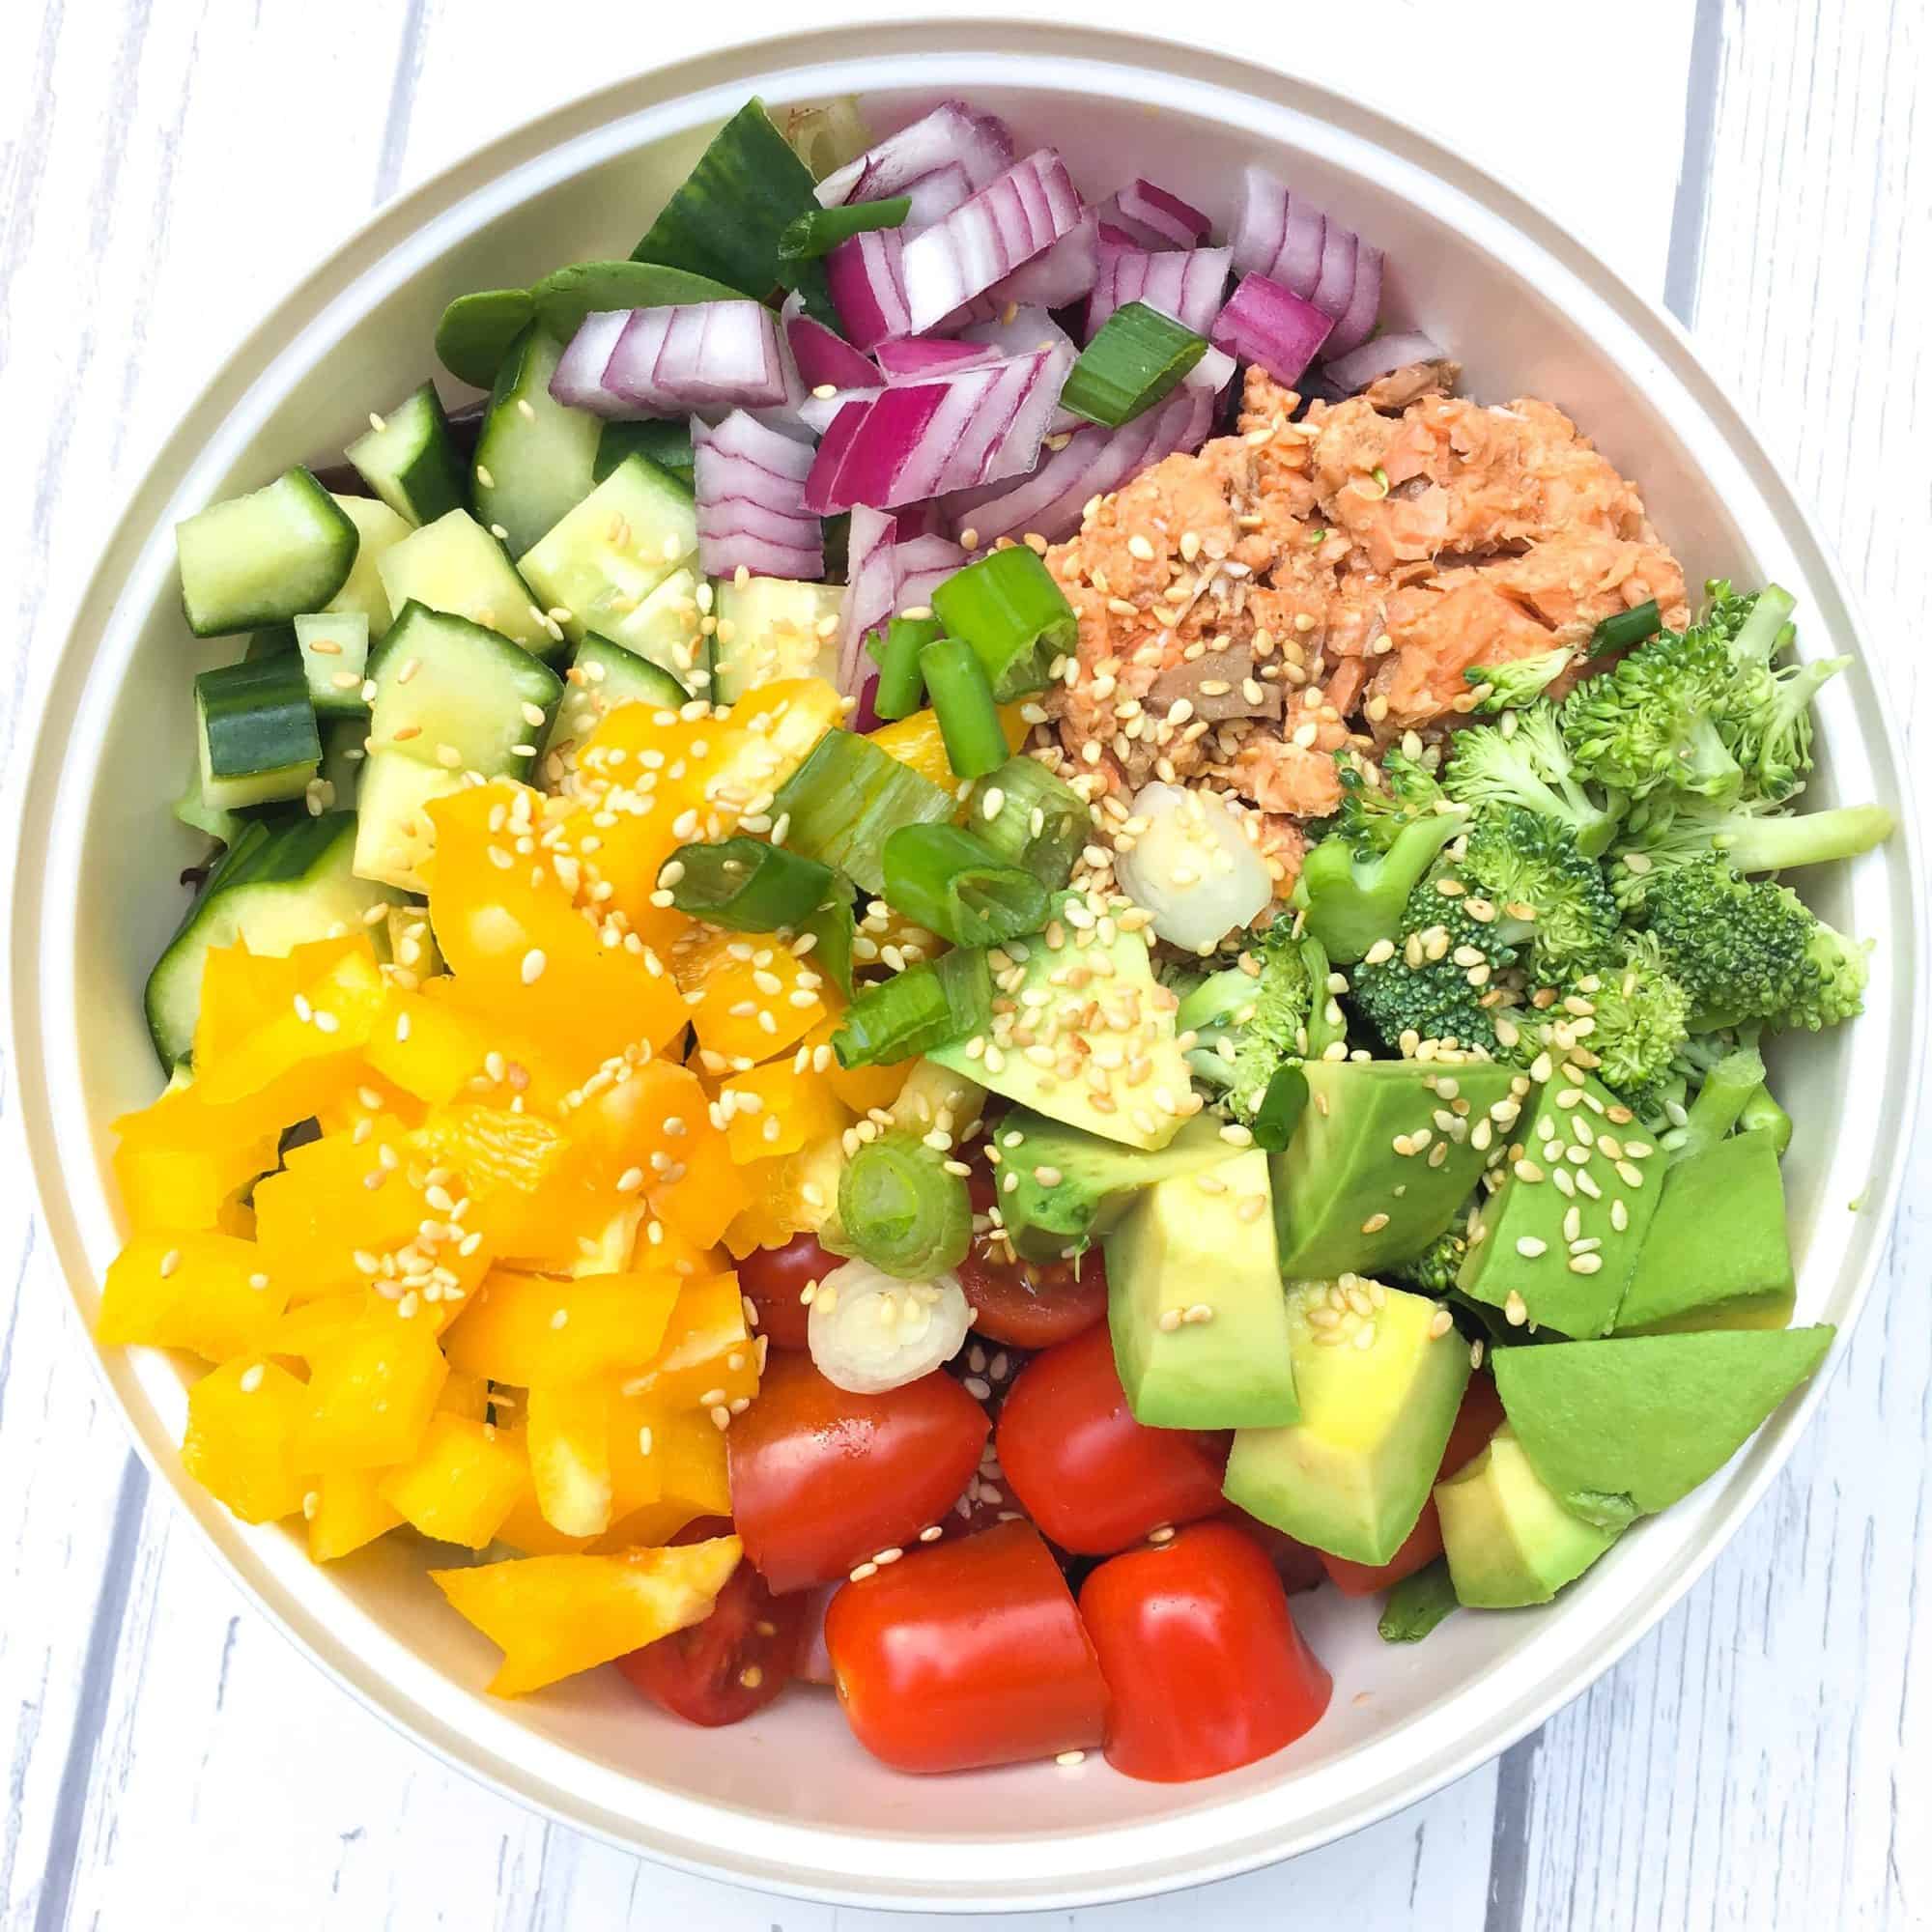 Canned Salmon Salad No Mayo | by Summer Yule